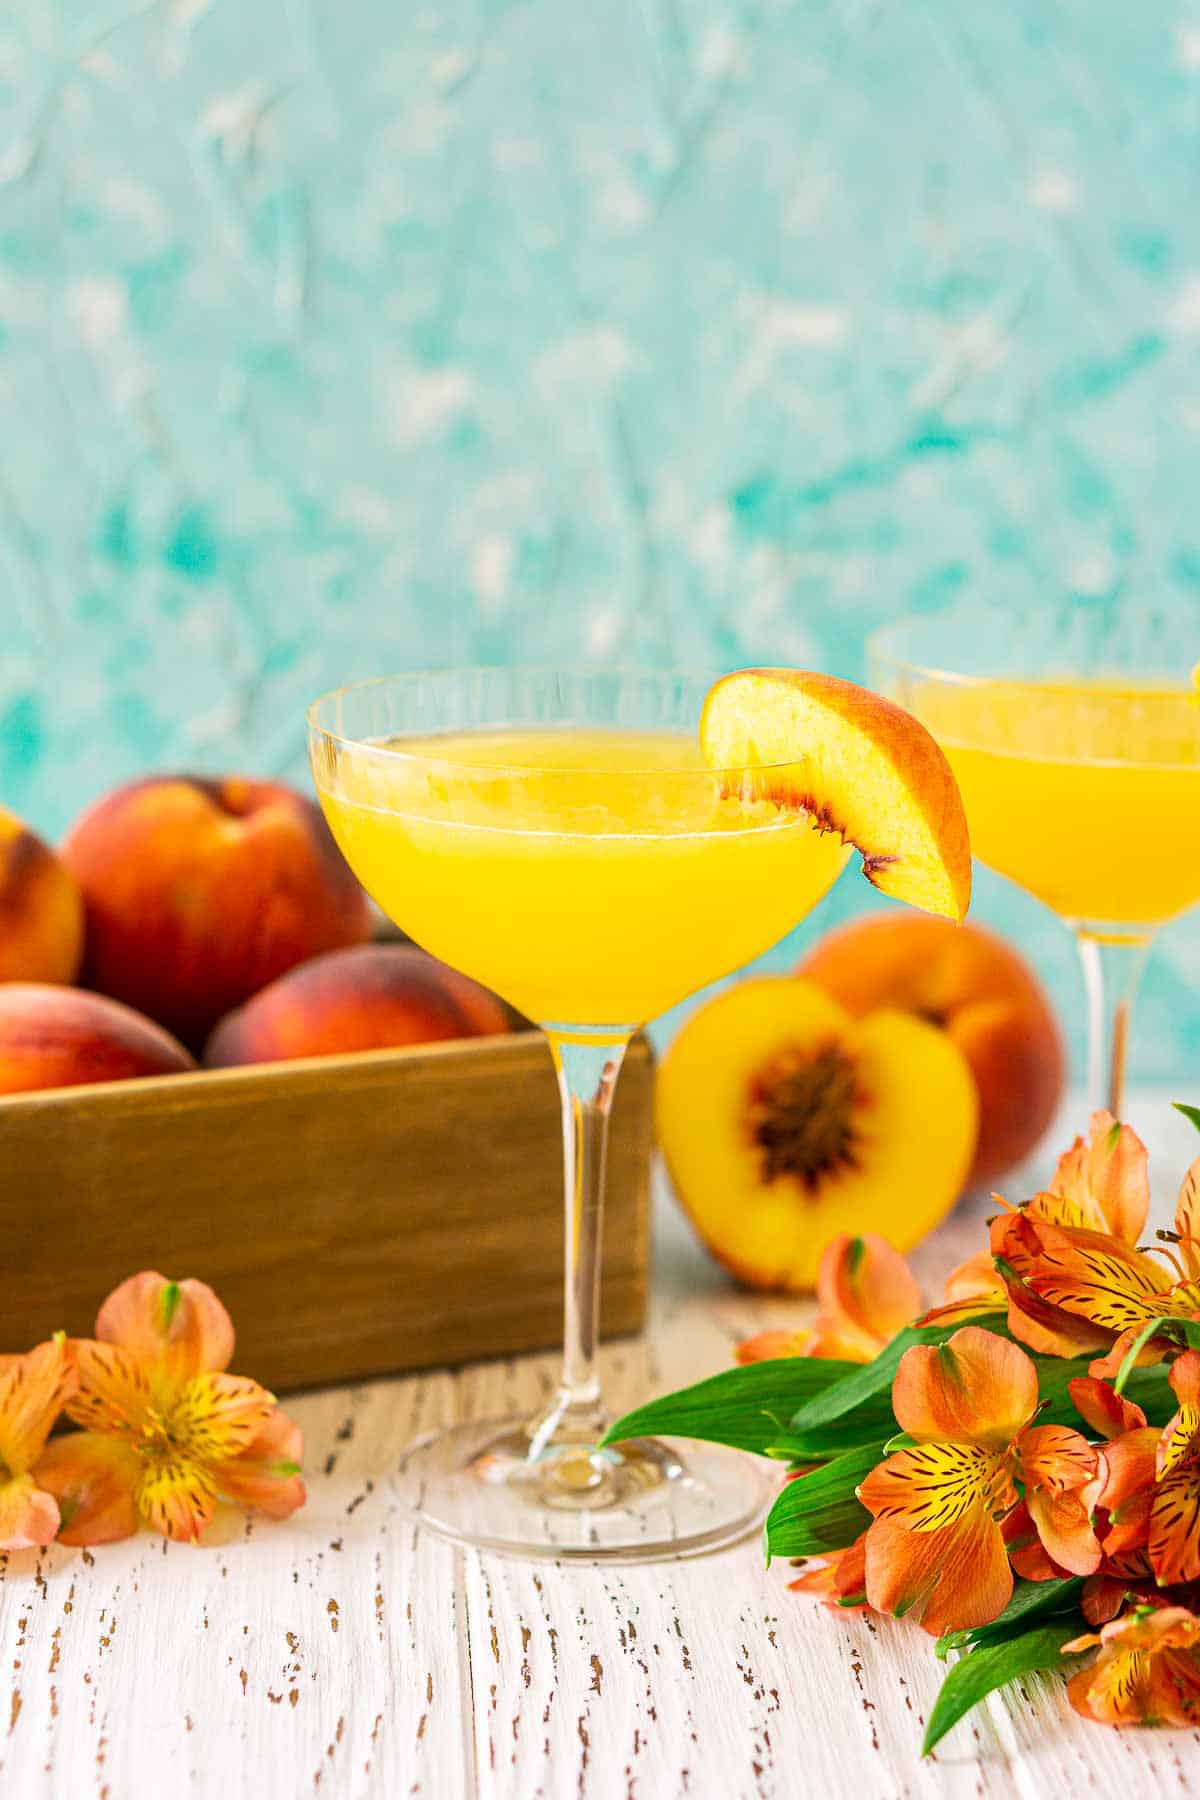 A peach daiquiri on a wooden surface with a box full of peaches behind it and orange flowers to both sides.